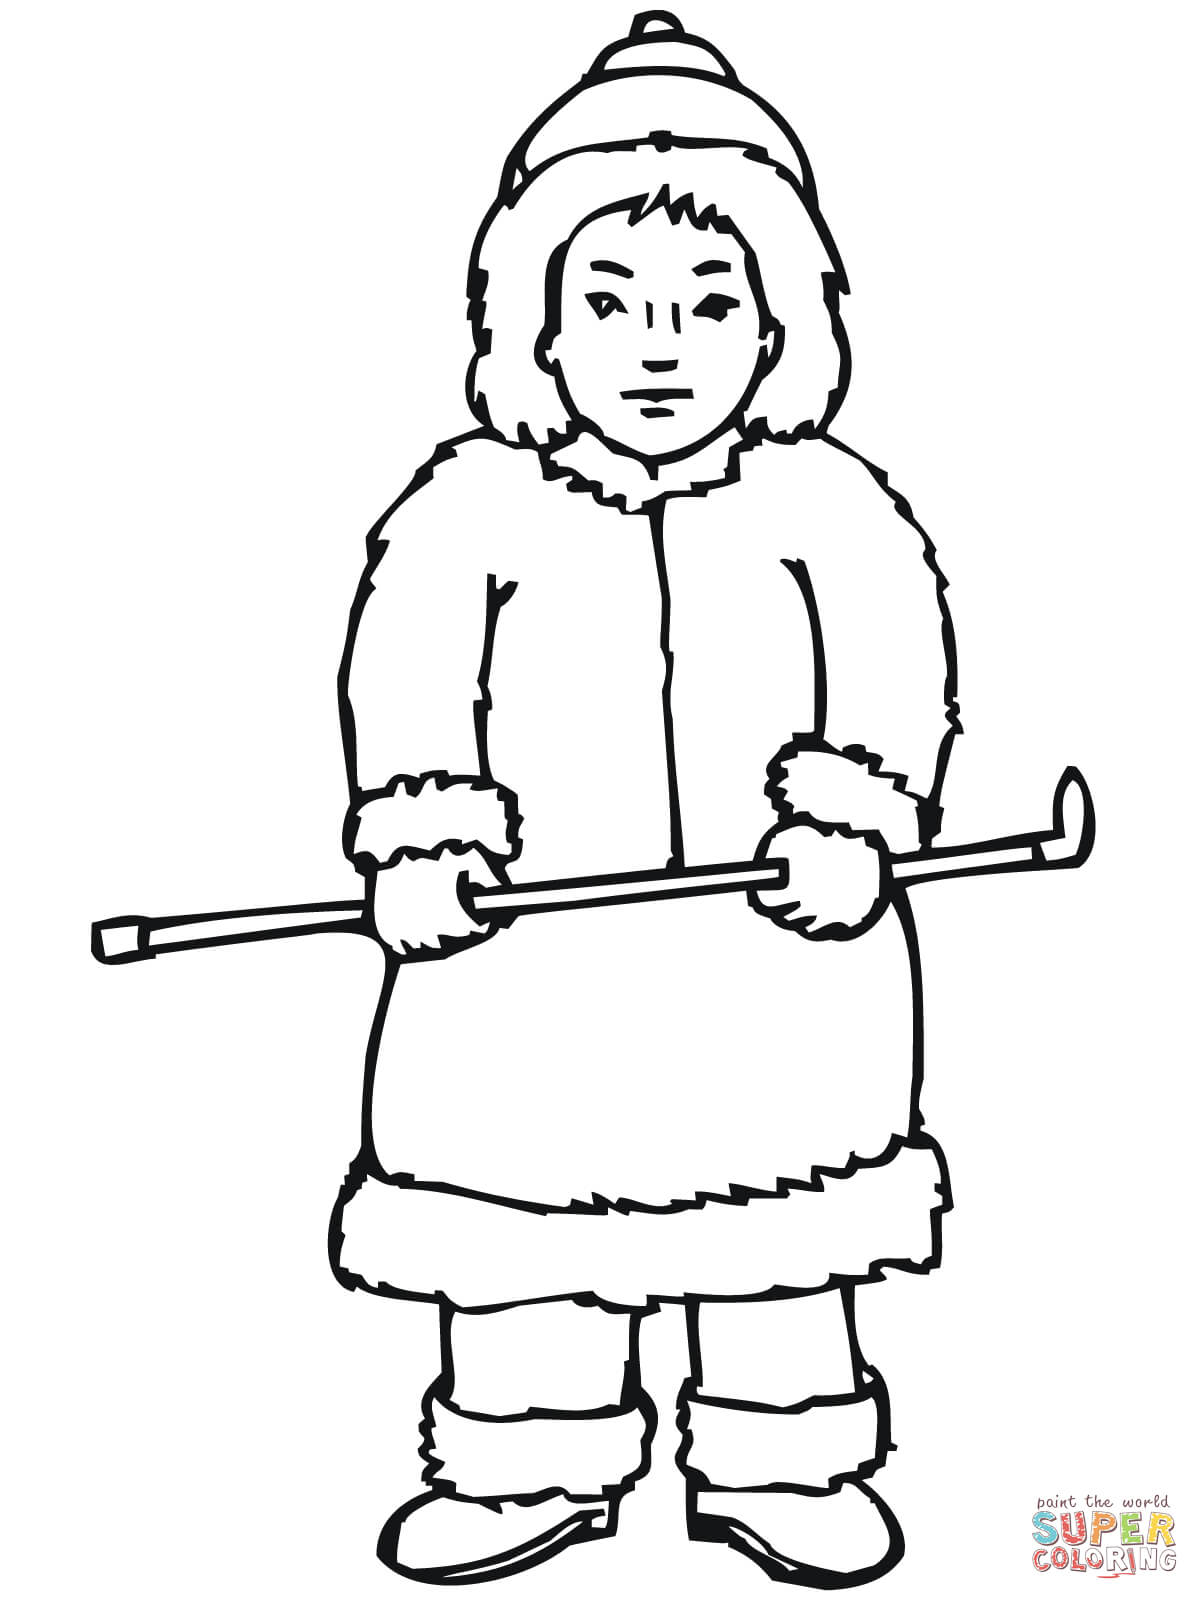 Inuit Coloring Pages Inuit Boy Coloring Page Free Printable Coloring Pages